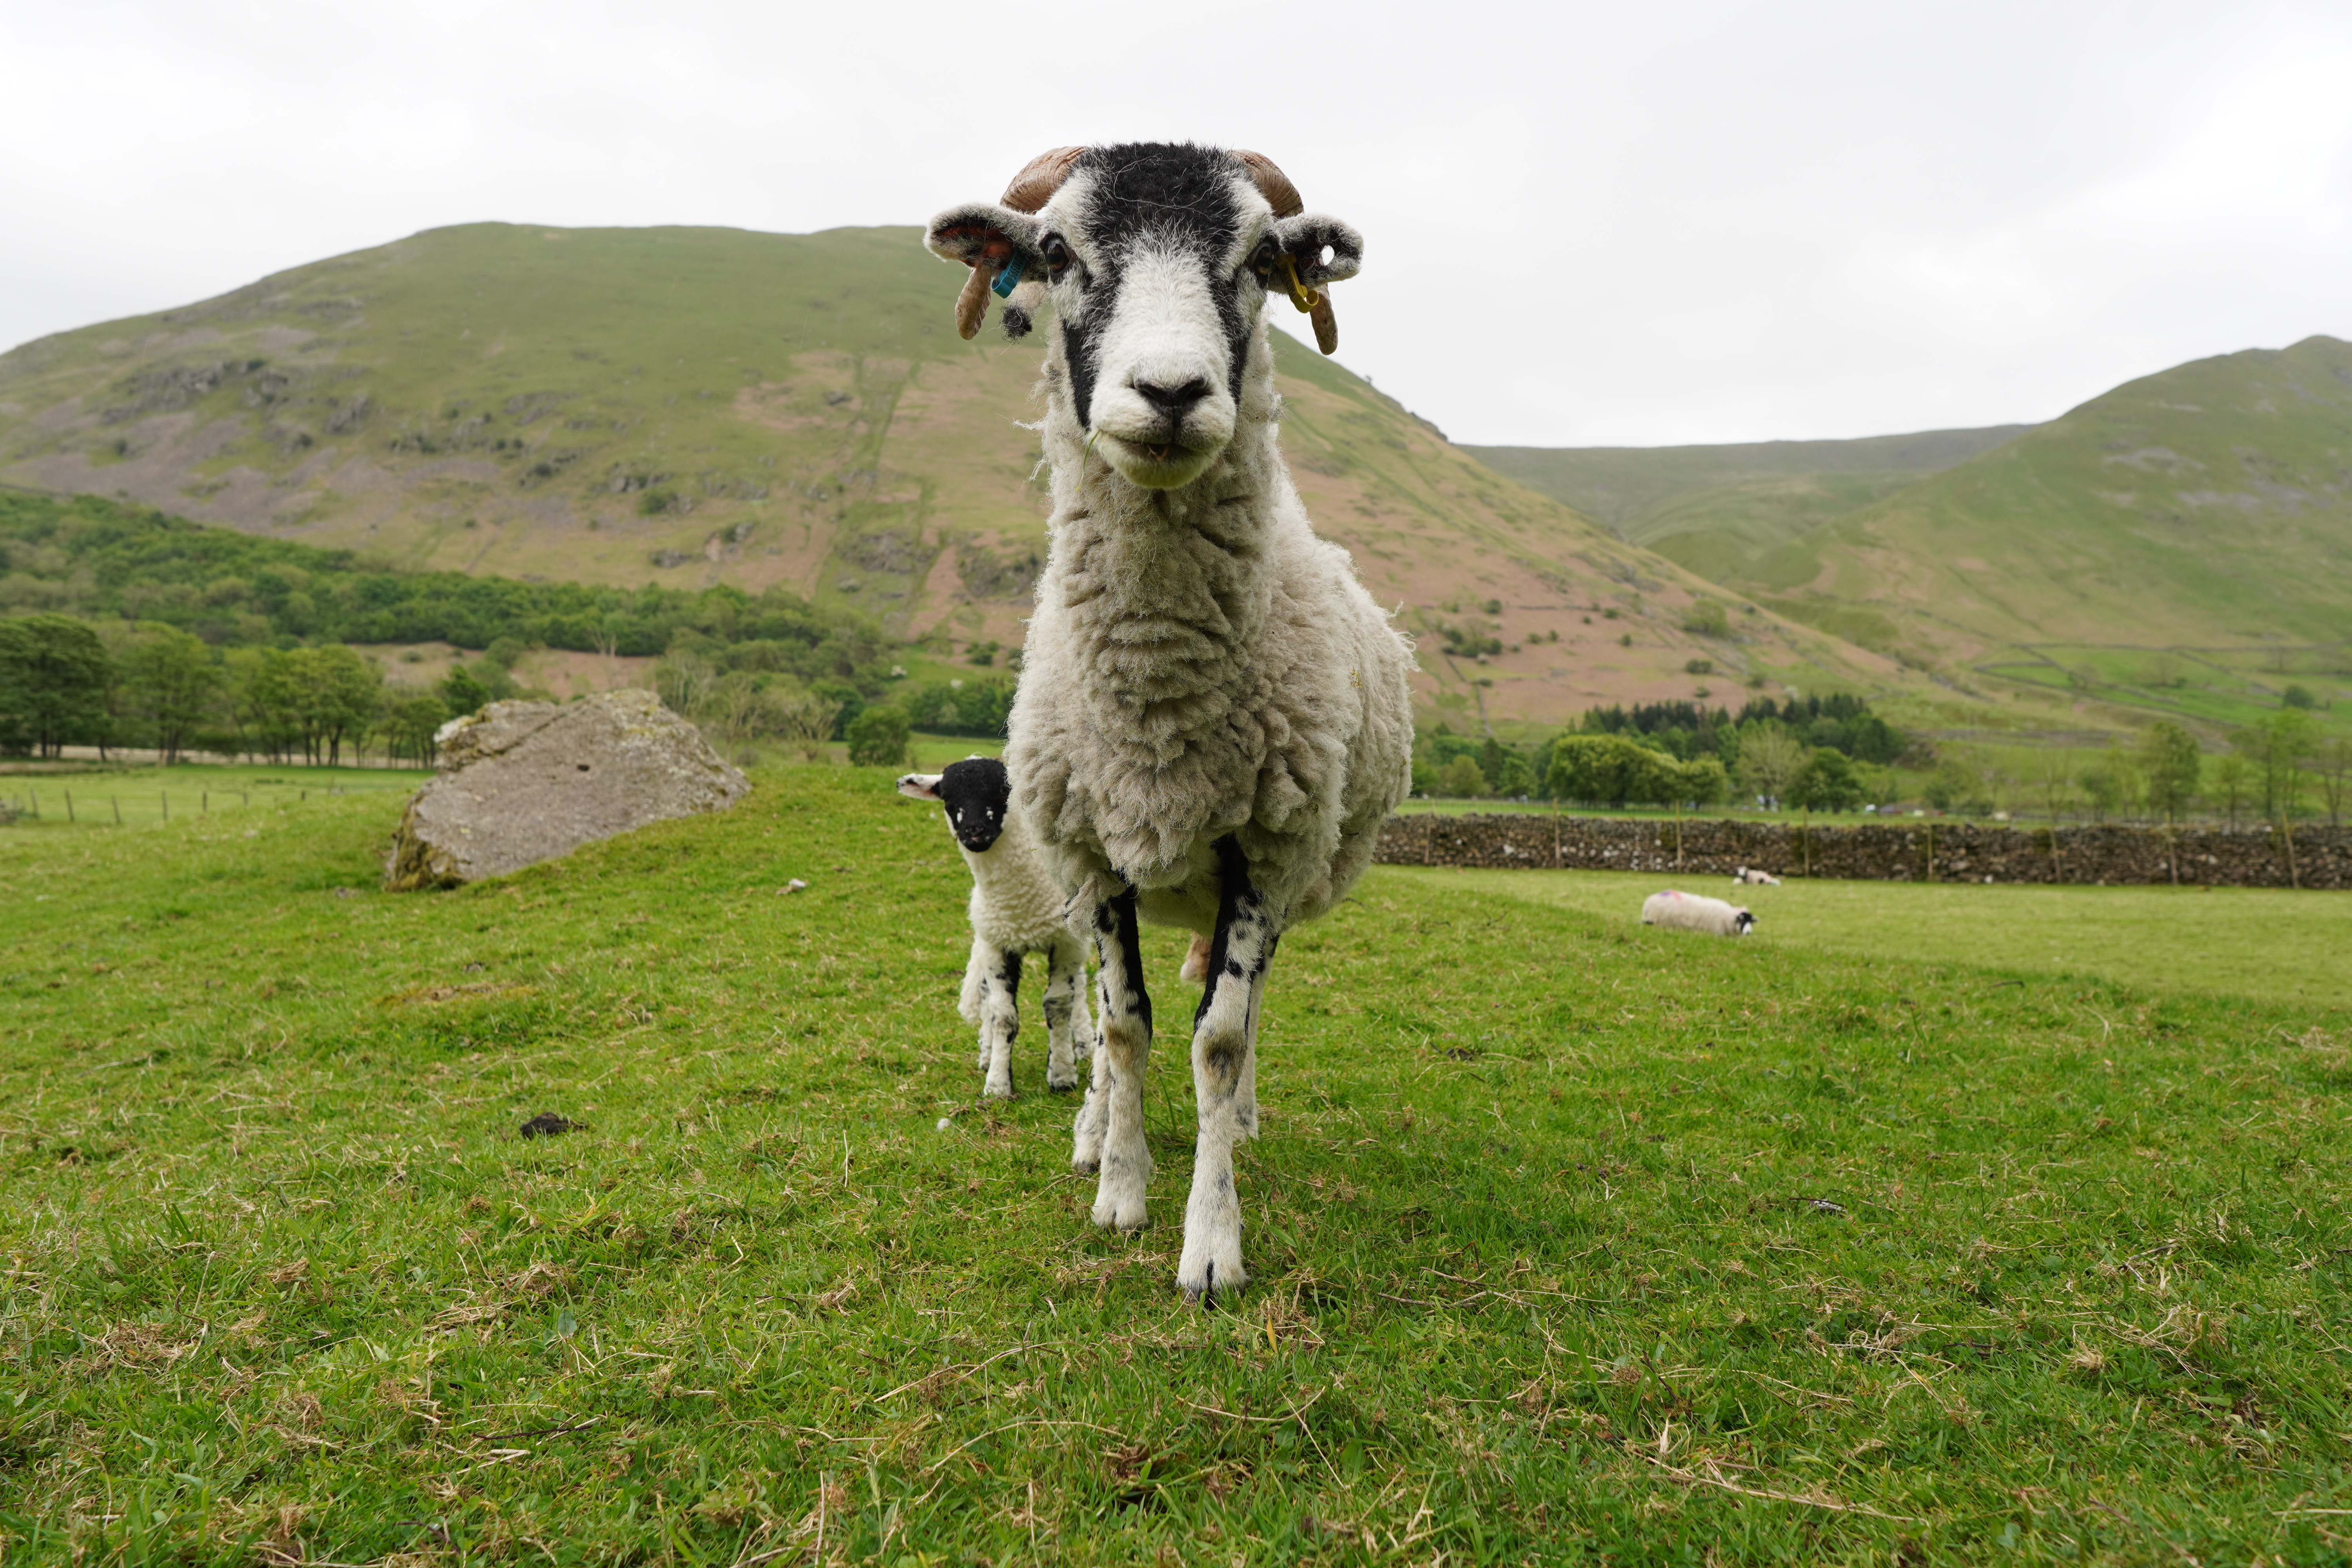 A lucky encounter with a sheep, Sony E 15mm F1.4 G, 1/160s, f/4.5, ISO100, JPEG